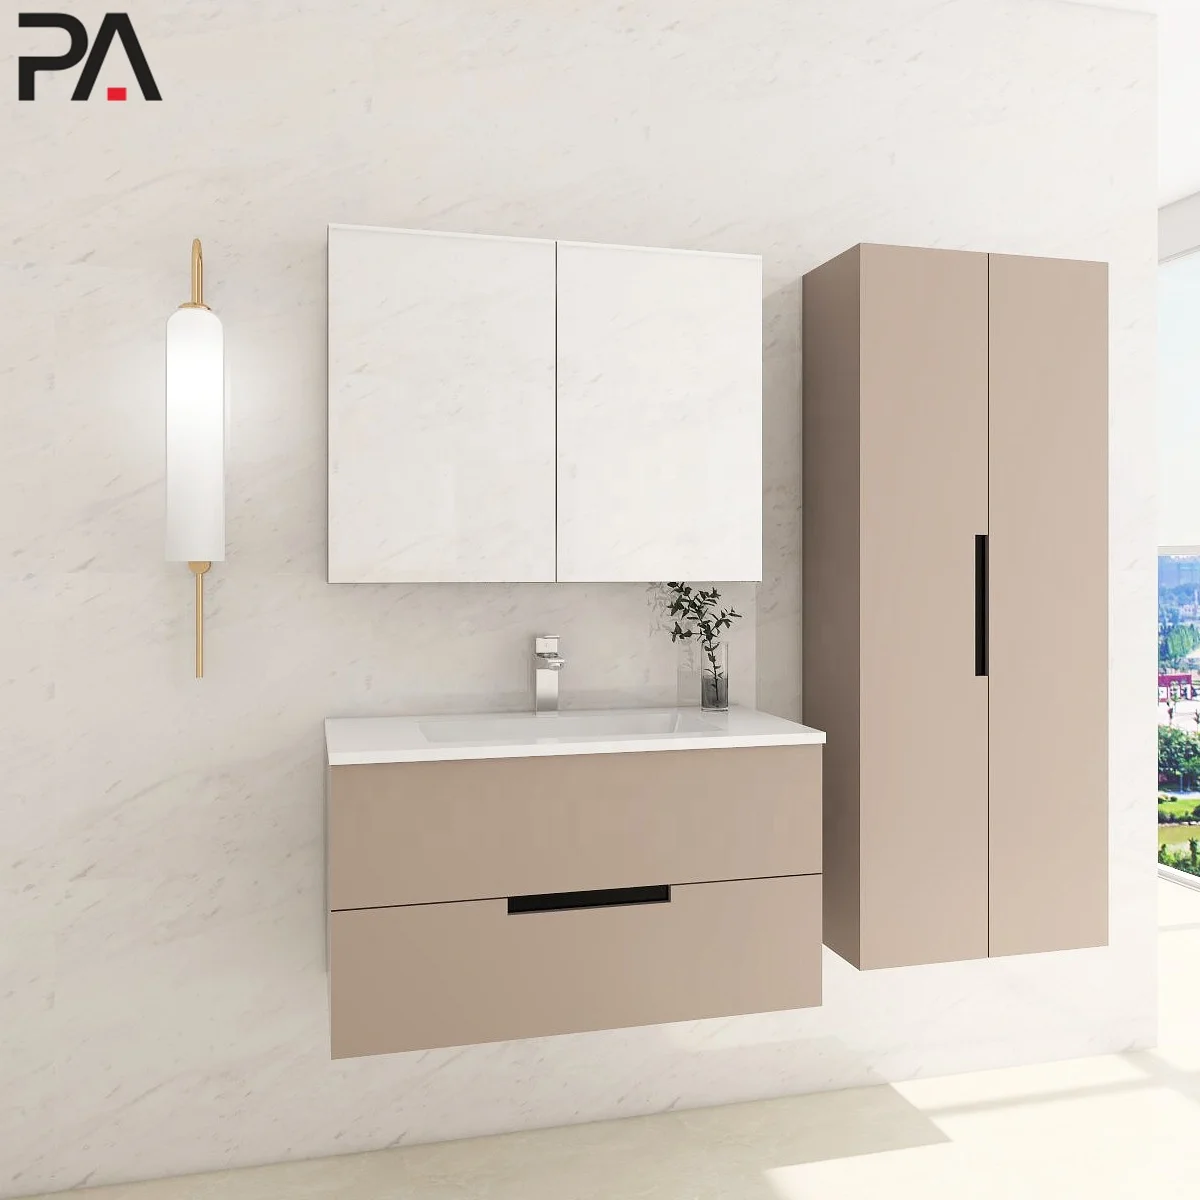 
Mirror+basin+faucets Environmental Friendly cheap single bathroom vanity chinese Customized solid wood classic bathroom cabinet 